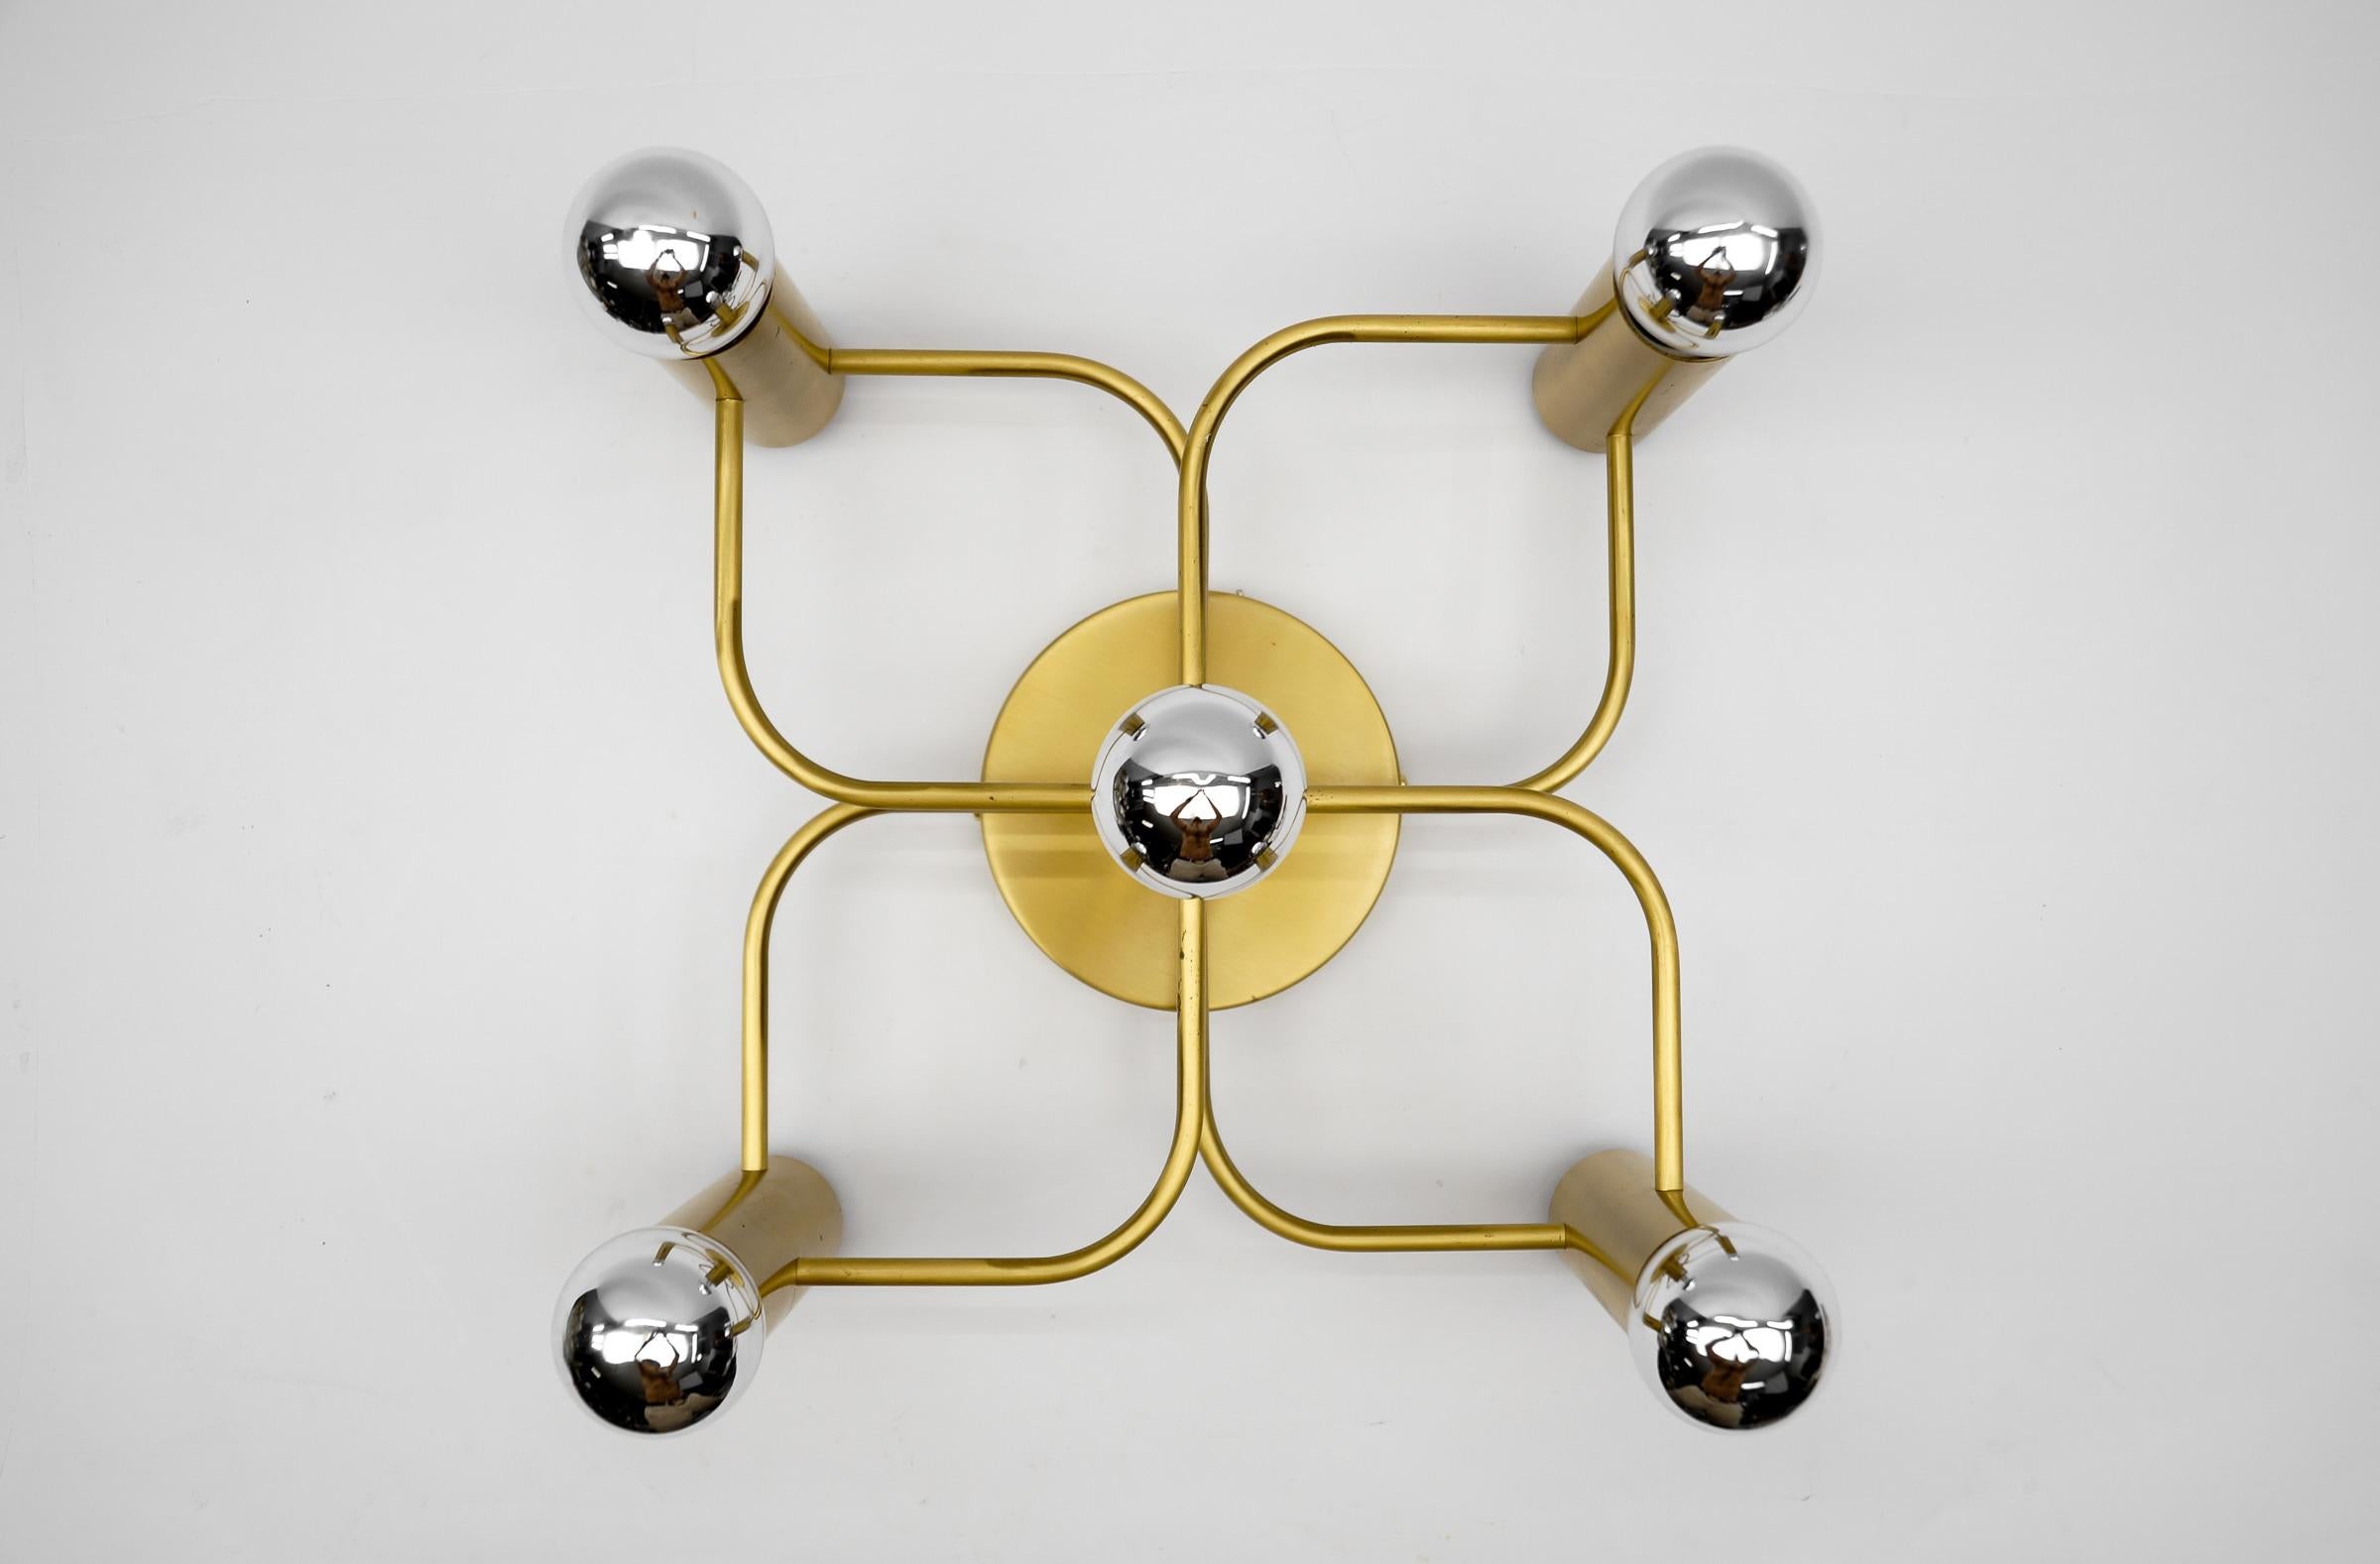 Sculptural Wall Light or Flush Mounts by Leola, 1970s

Dimensions
Height: 6.19 in ( 16 cm )
Width: 17.72 in ( 45 cm )
Depth: 17.72 in ( 45 cm )

The fixture need 1 x E27 standard bulb with 60W max.

Light bulbs are not included.
It is possible to